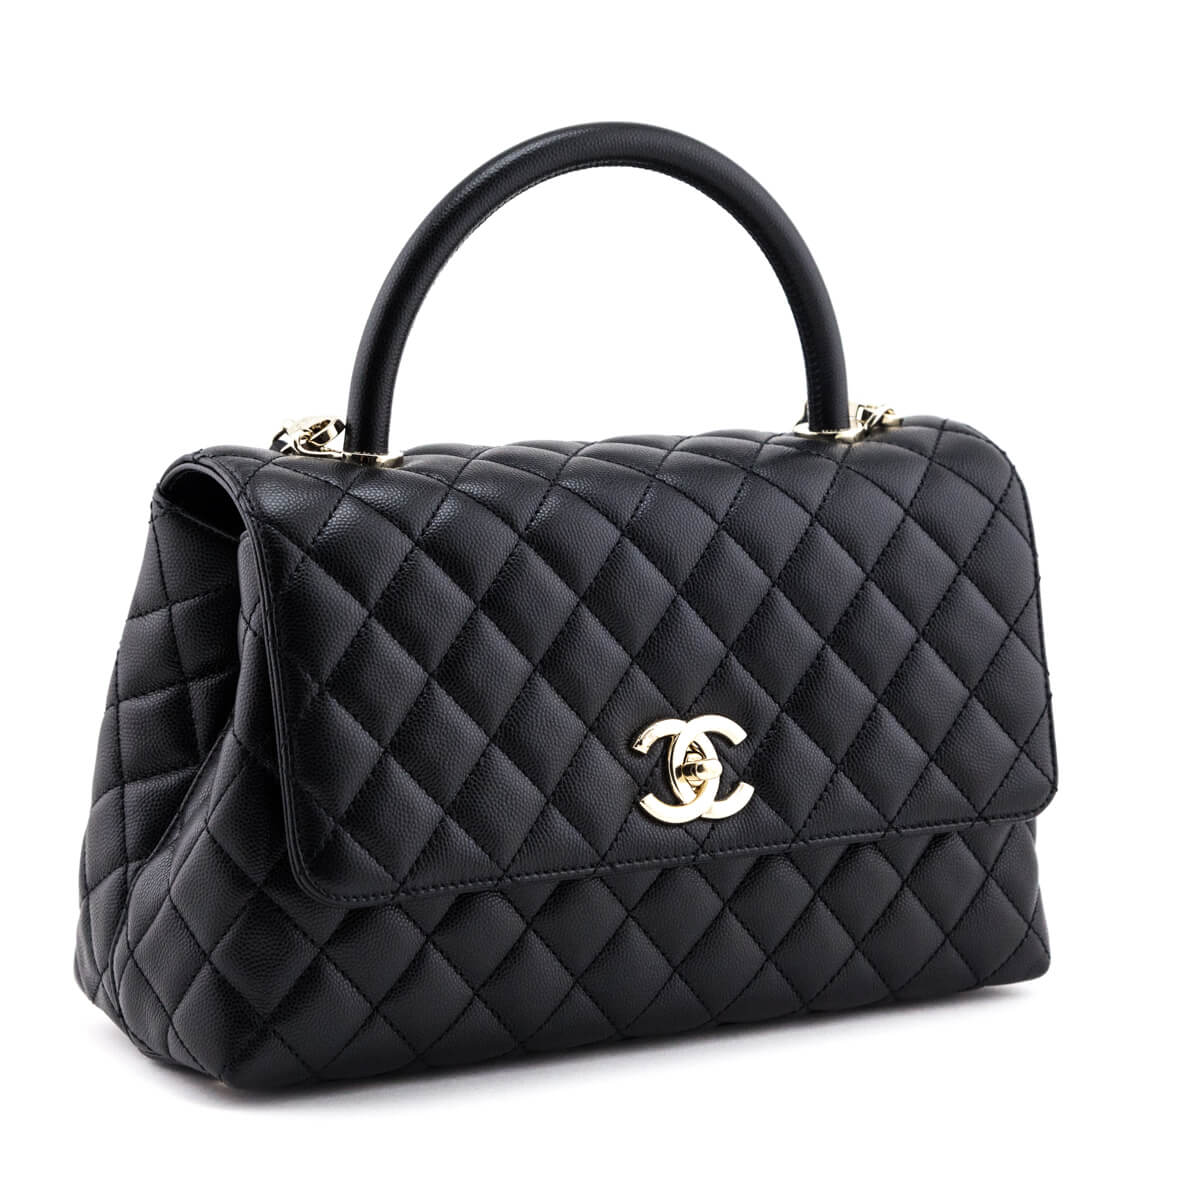 Chanel Black Quilted Caviar Small Coco Handle Flap Bag - Love that Bag etc - Preowned Authentic Designer Handbags & Preloved Fashions